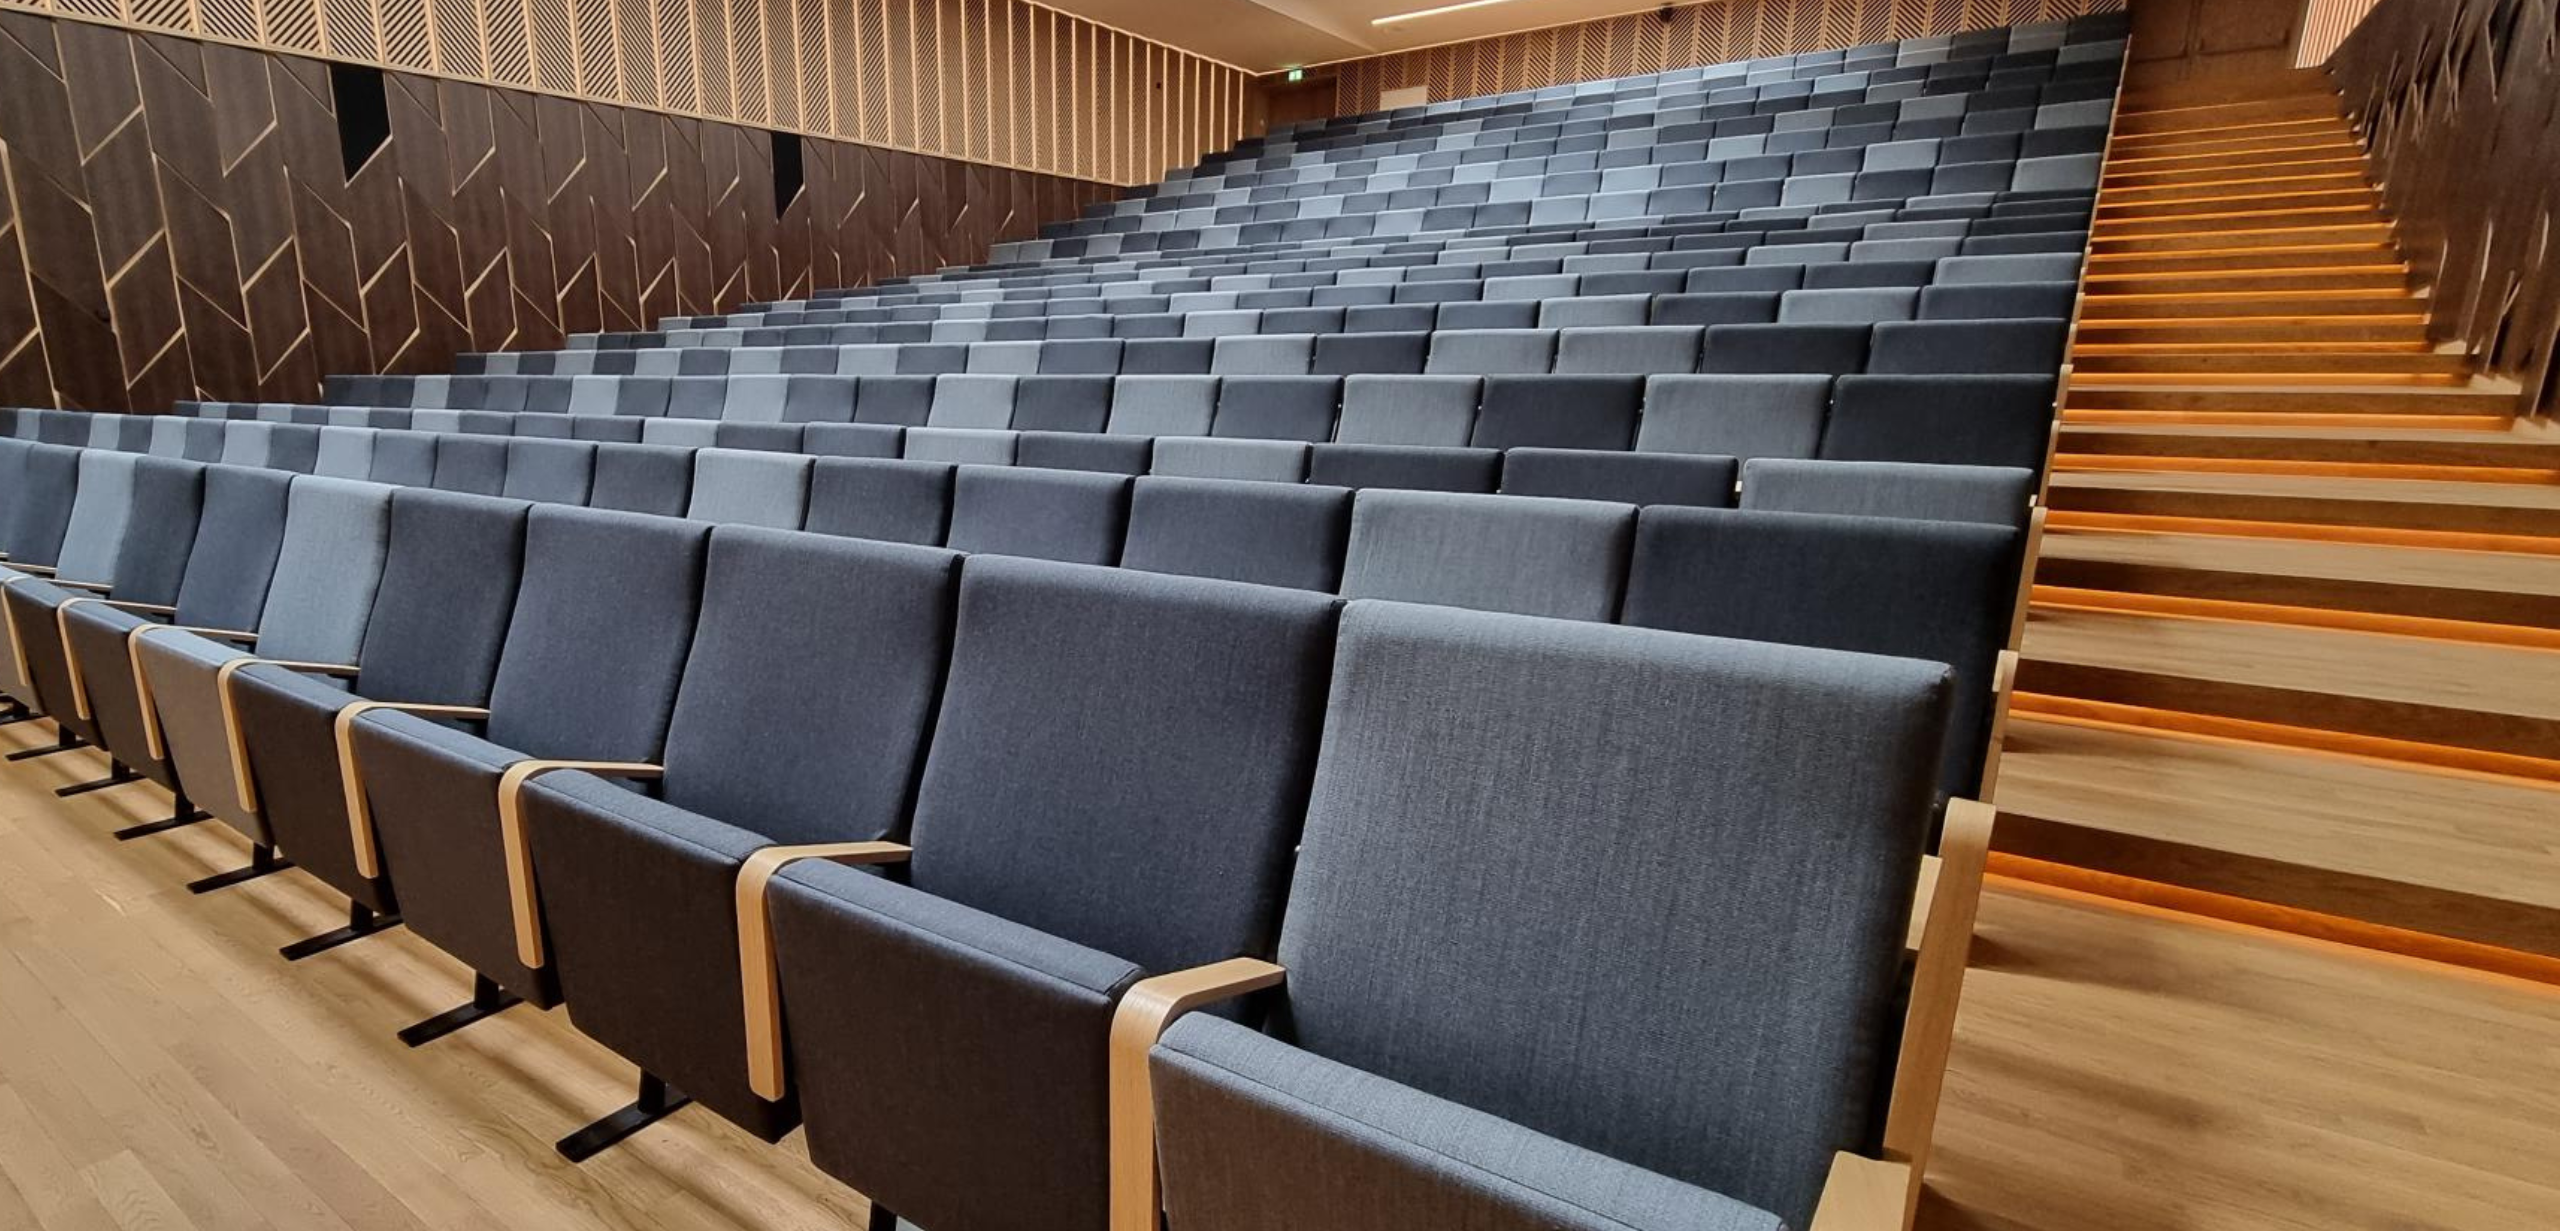 rows of grey seats in an auditorium